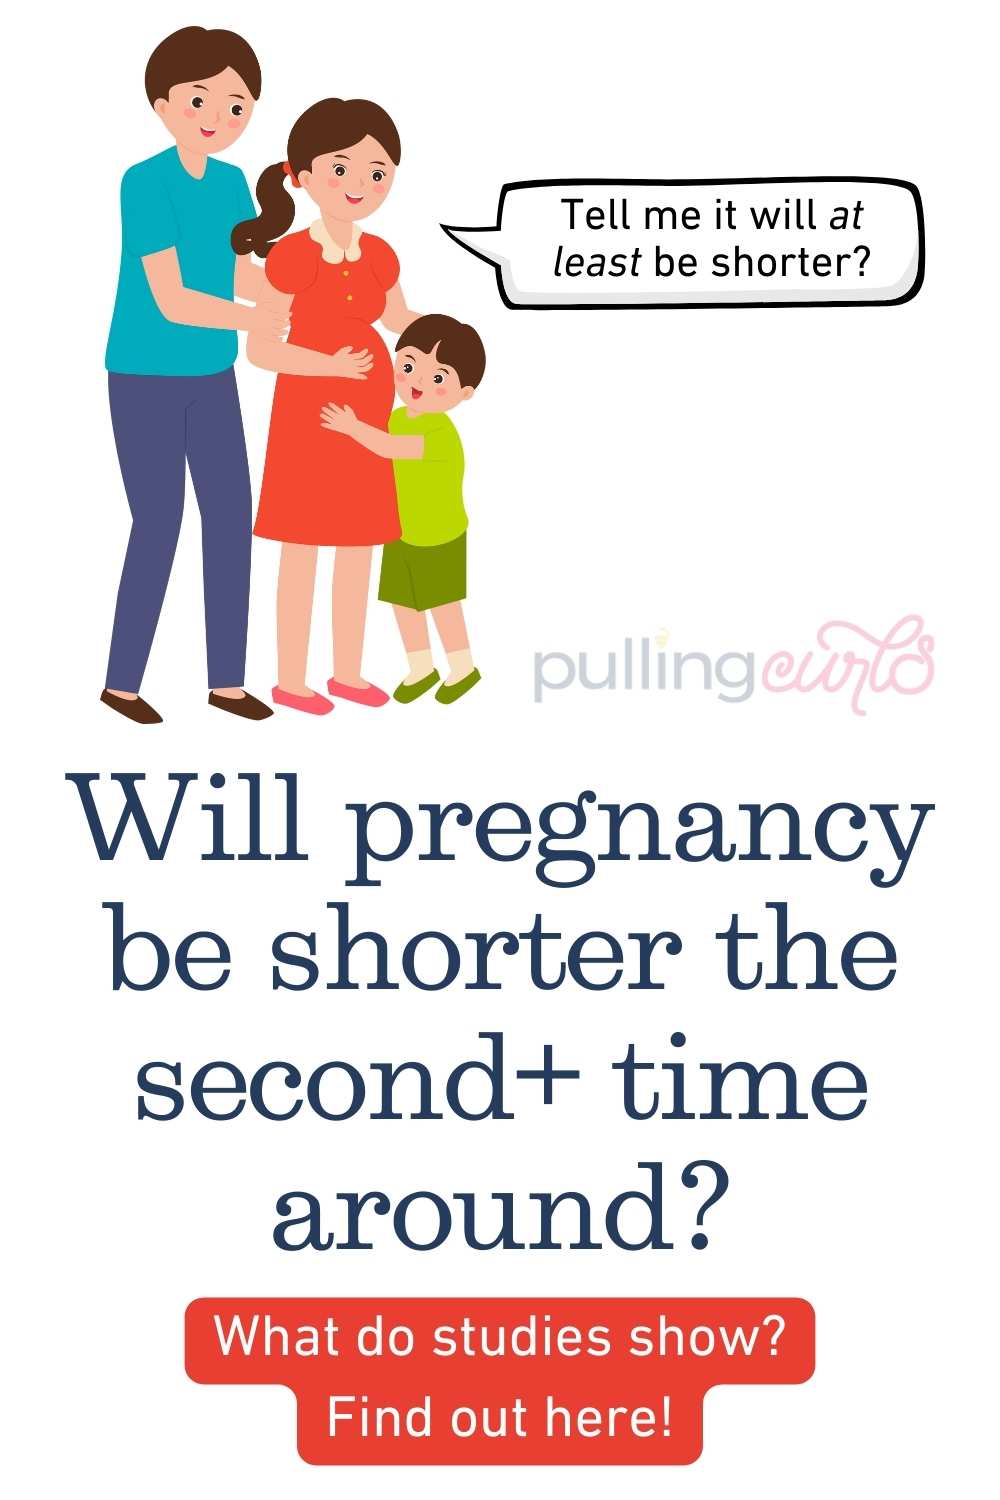 pregnant family with the mom saying "will it at least be shorter this time" // will pregnancy be shorter the second+ time around? What do studies show, find out here? via @pullingcurls